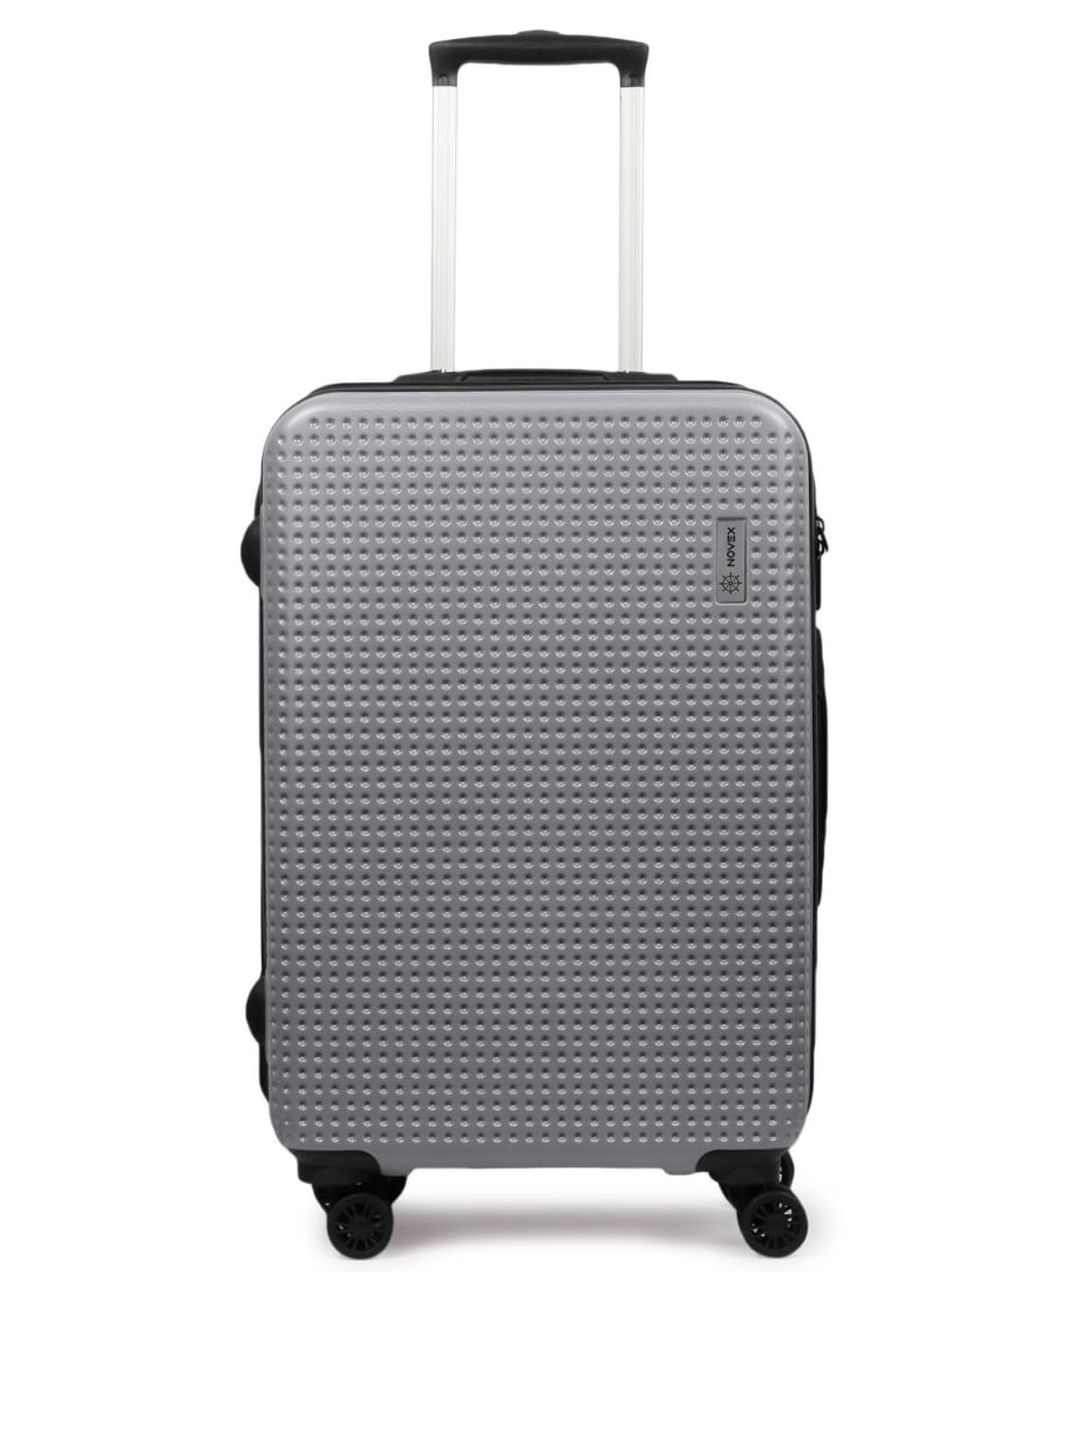 NOVEX Unisex Grey Textured Cabin Hard-Sided Trolley Suitcase Price in India